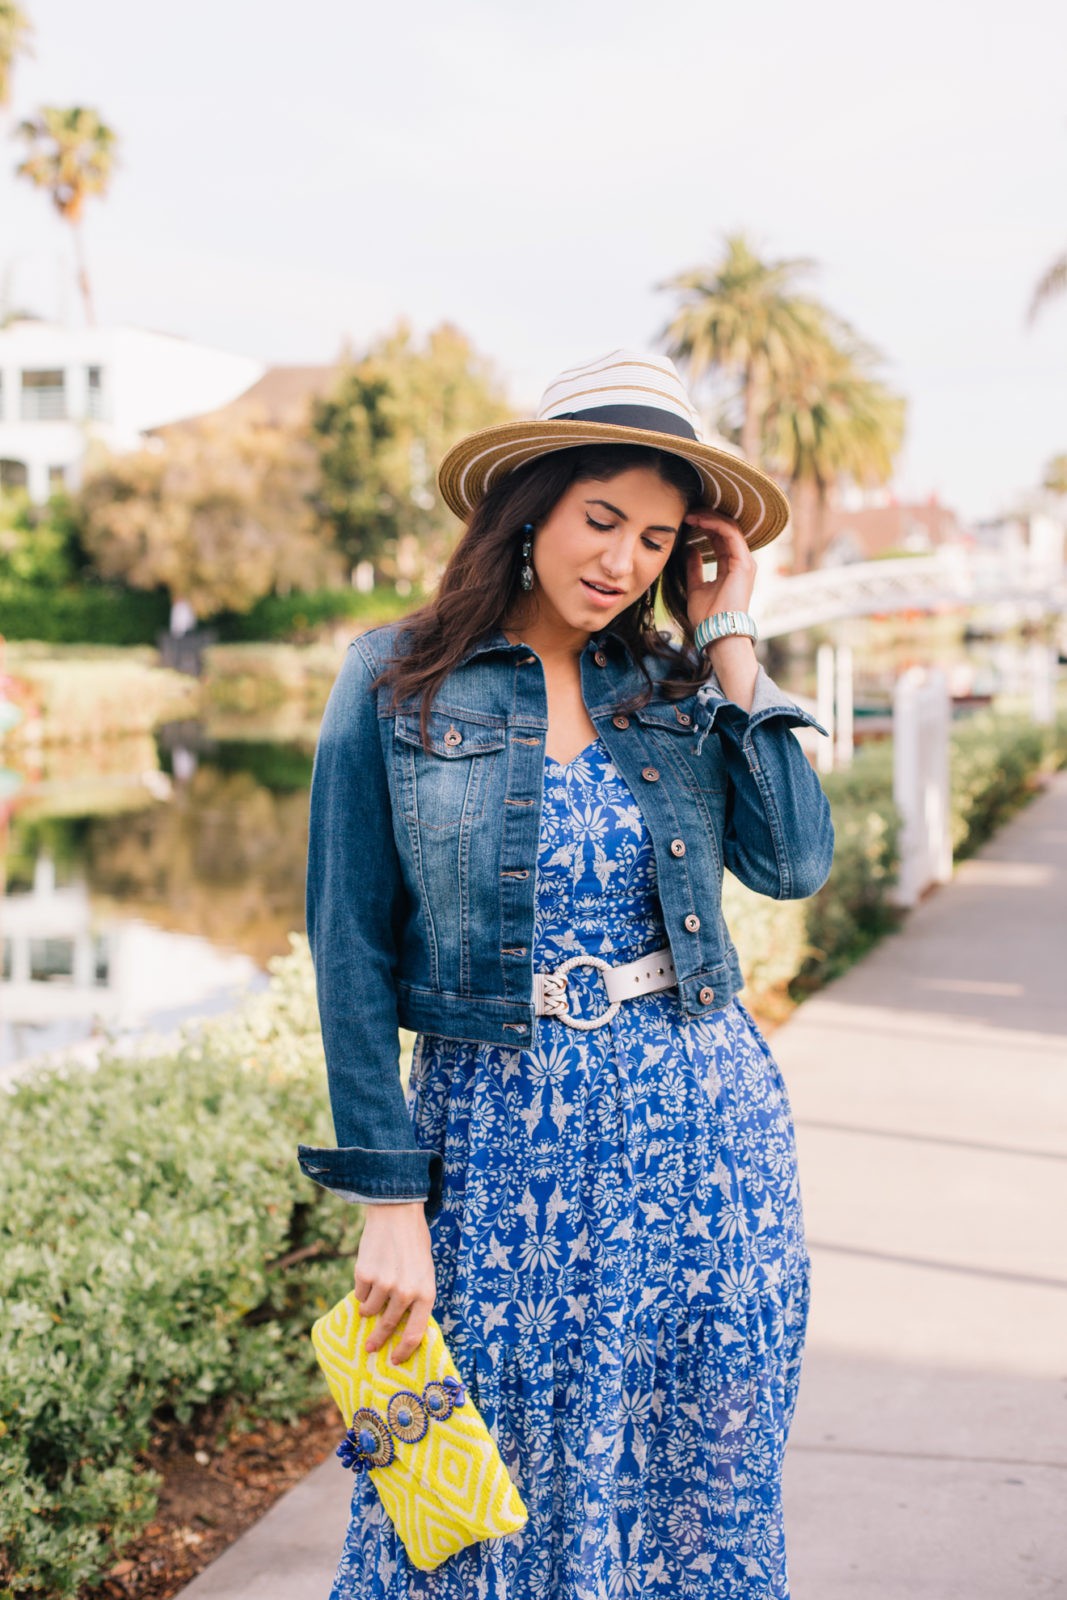 Stage Summer Moments, 2019 Summer Bucket List Moments by popular Los Angeles Lifestyle Blogger Laura Lily: image of woman at Venice, California canals wearing Stage Stores flowing blue and white floral maxi dress, white belt, cropped jean jacket, straw sun hat and holding a yellow clutch. 